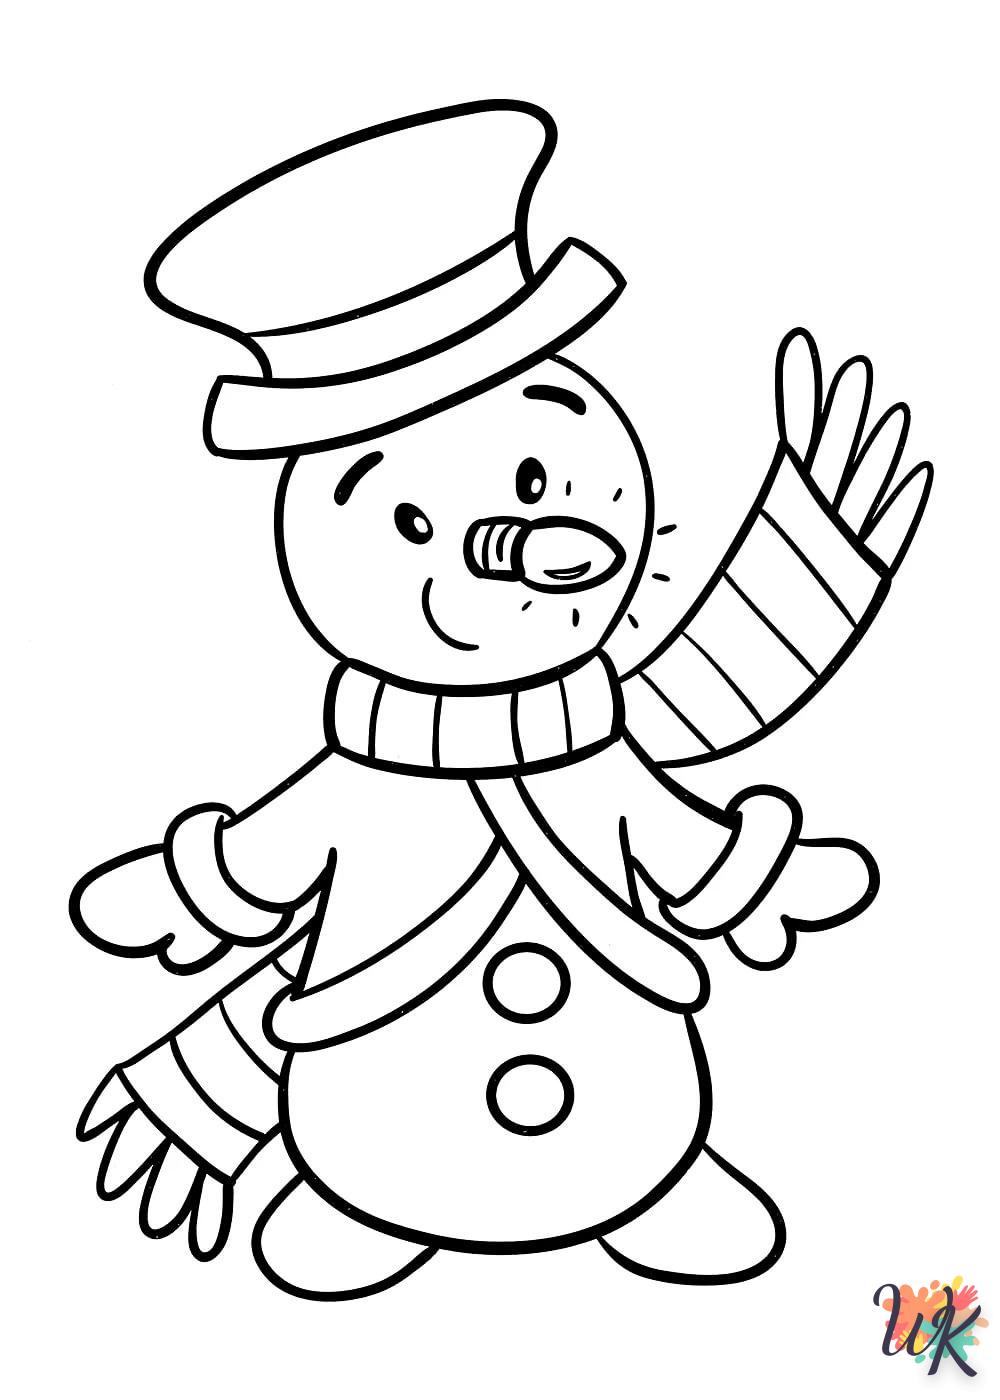 Snowman coloring page to print free